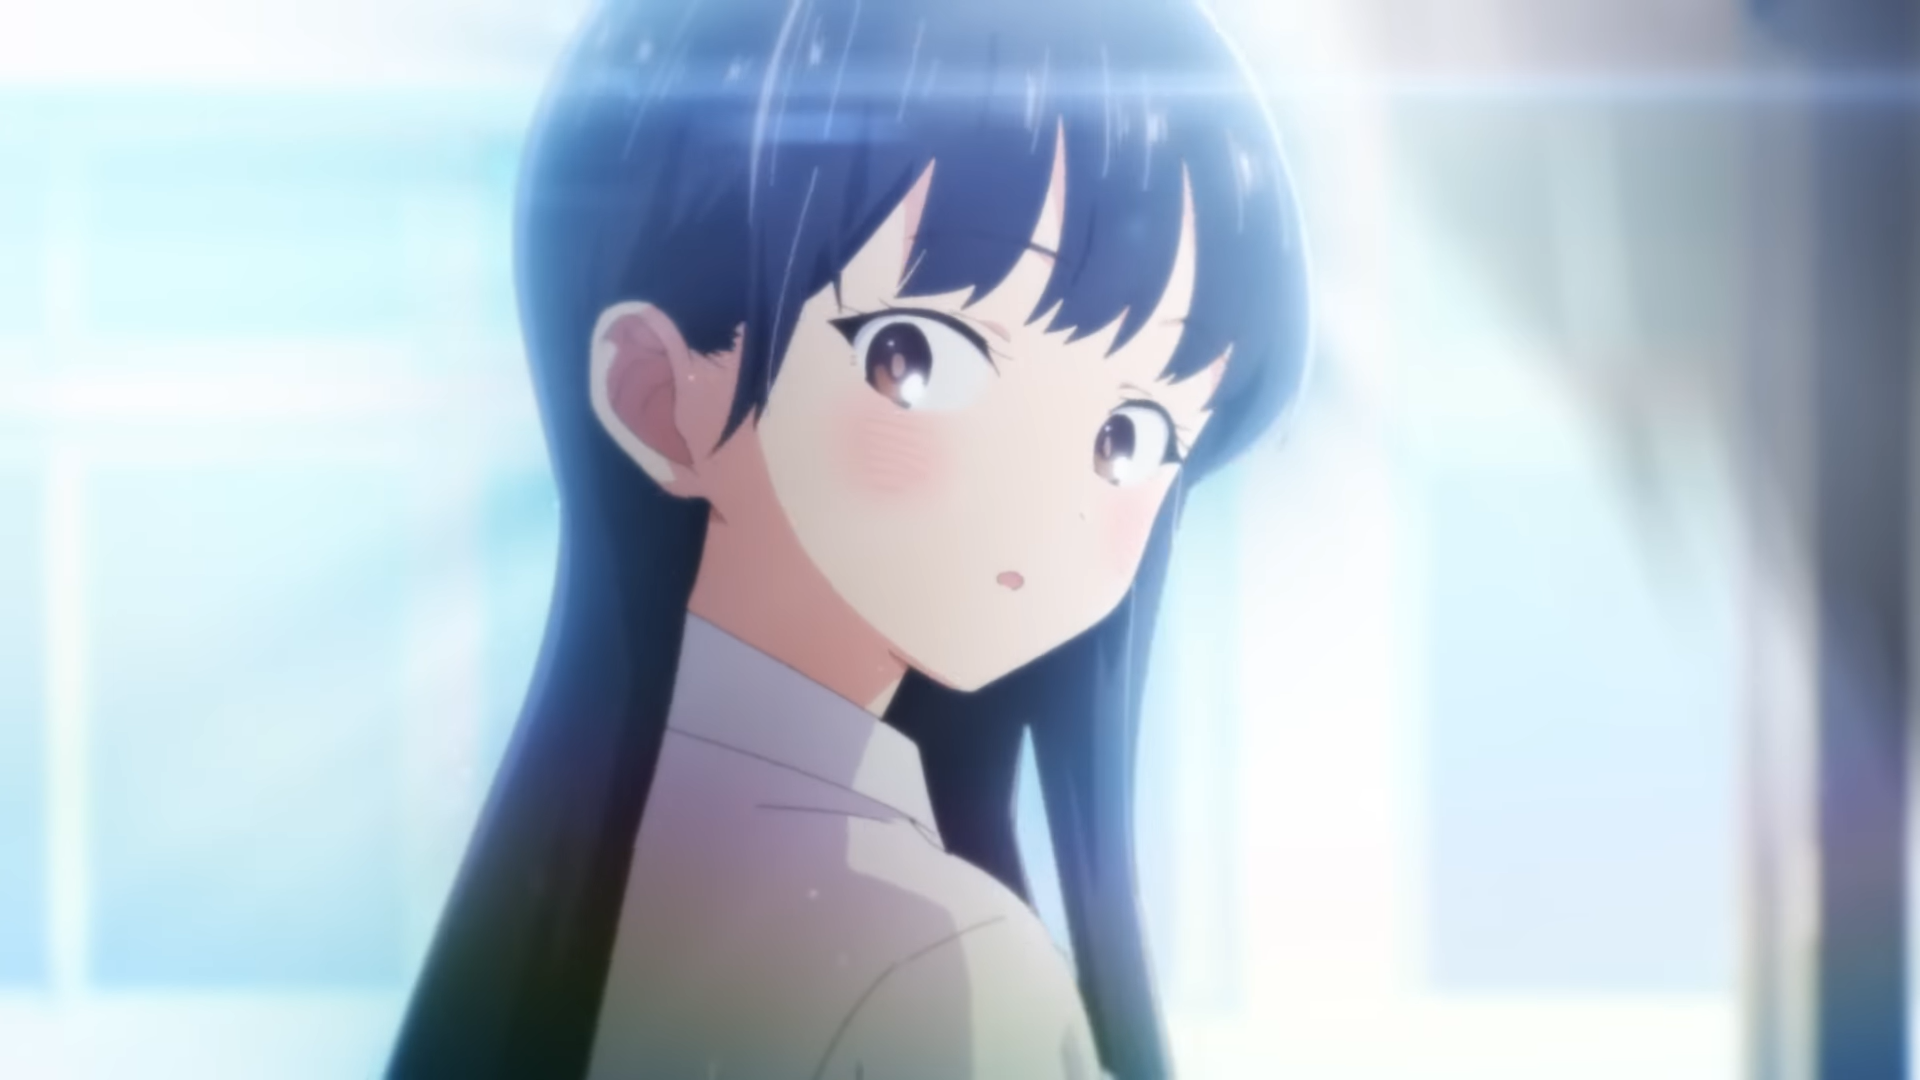 The Dangers in My Heart Anime Trailer Revealed, April 2023 Premiere